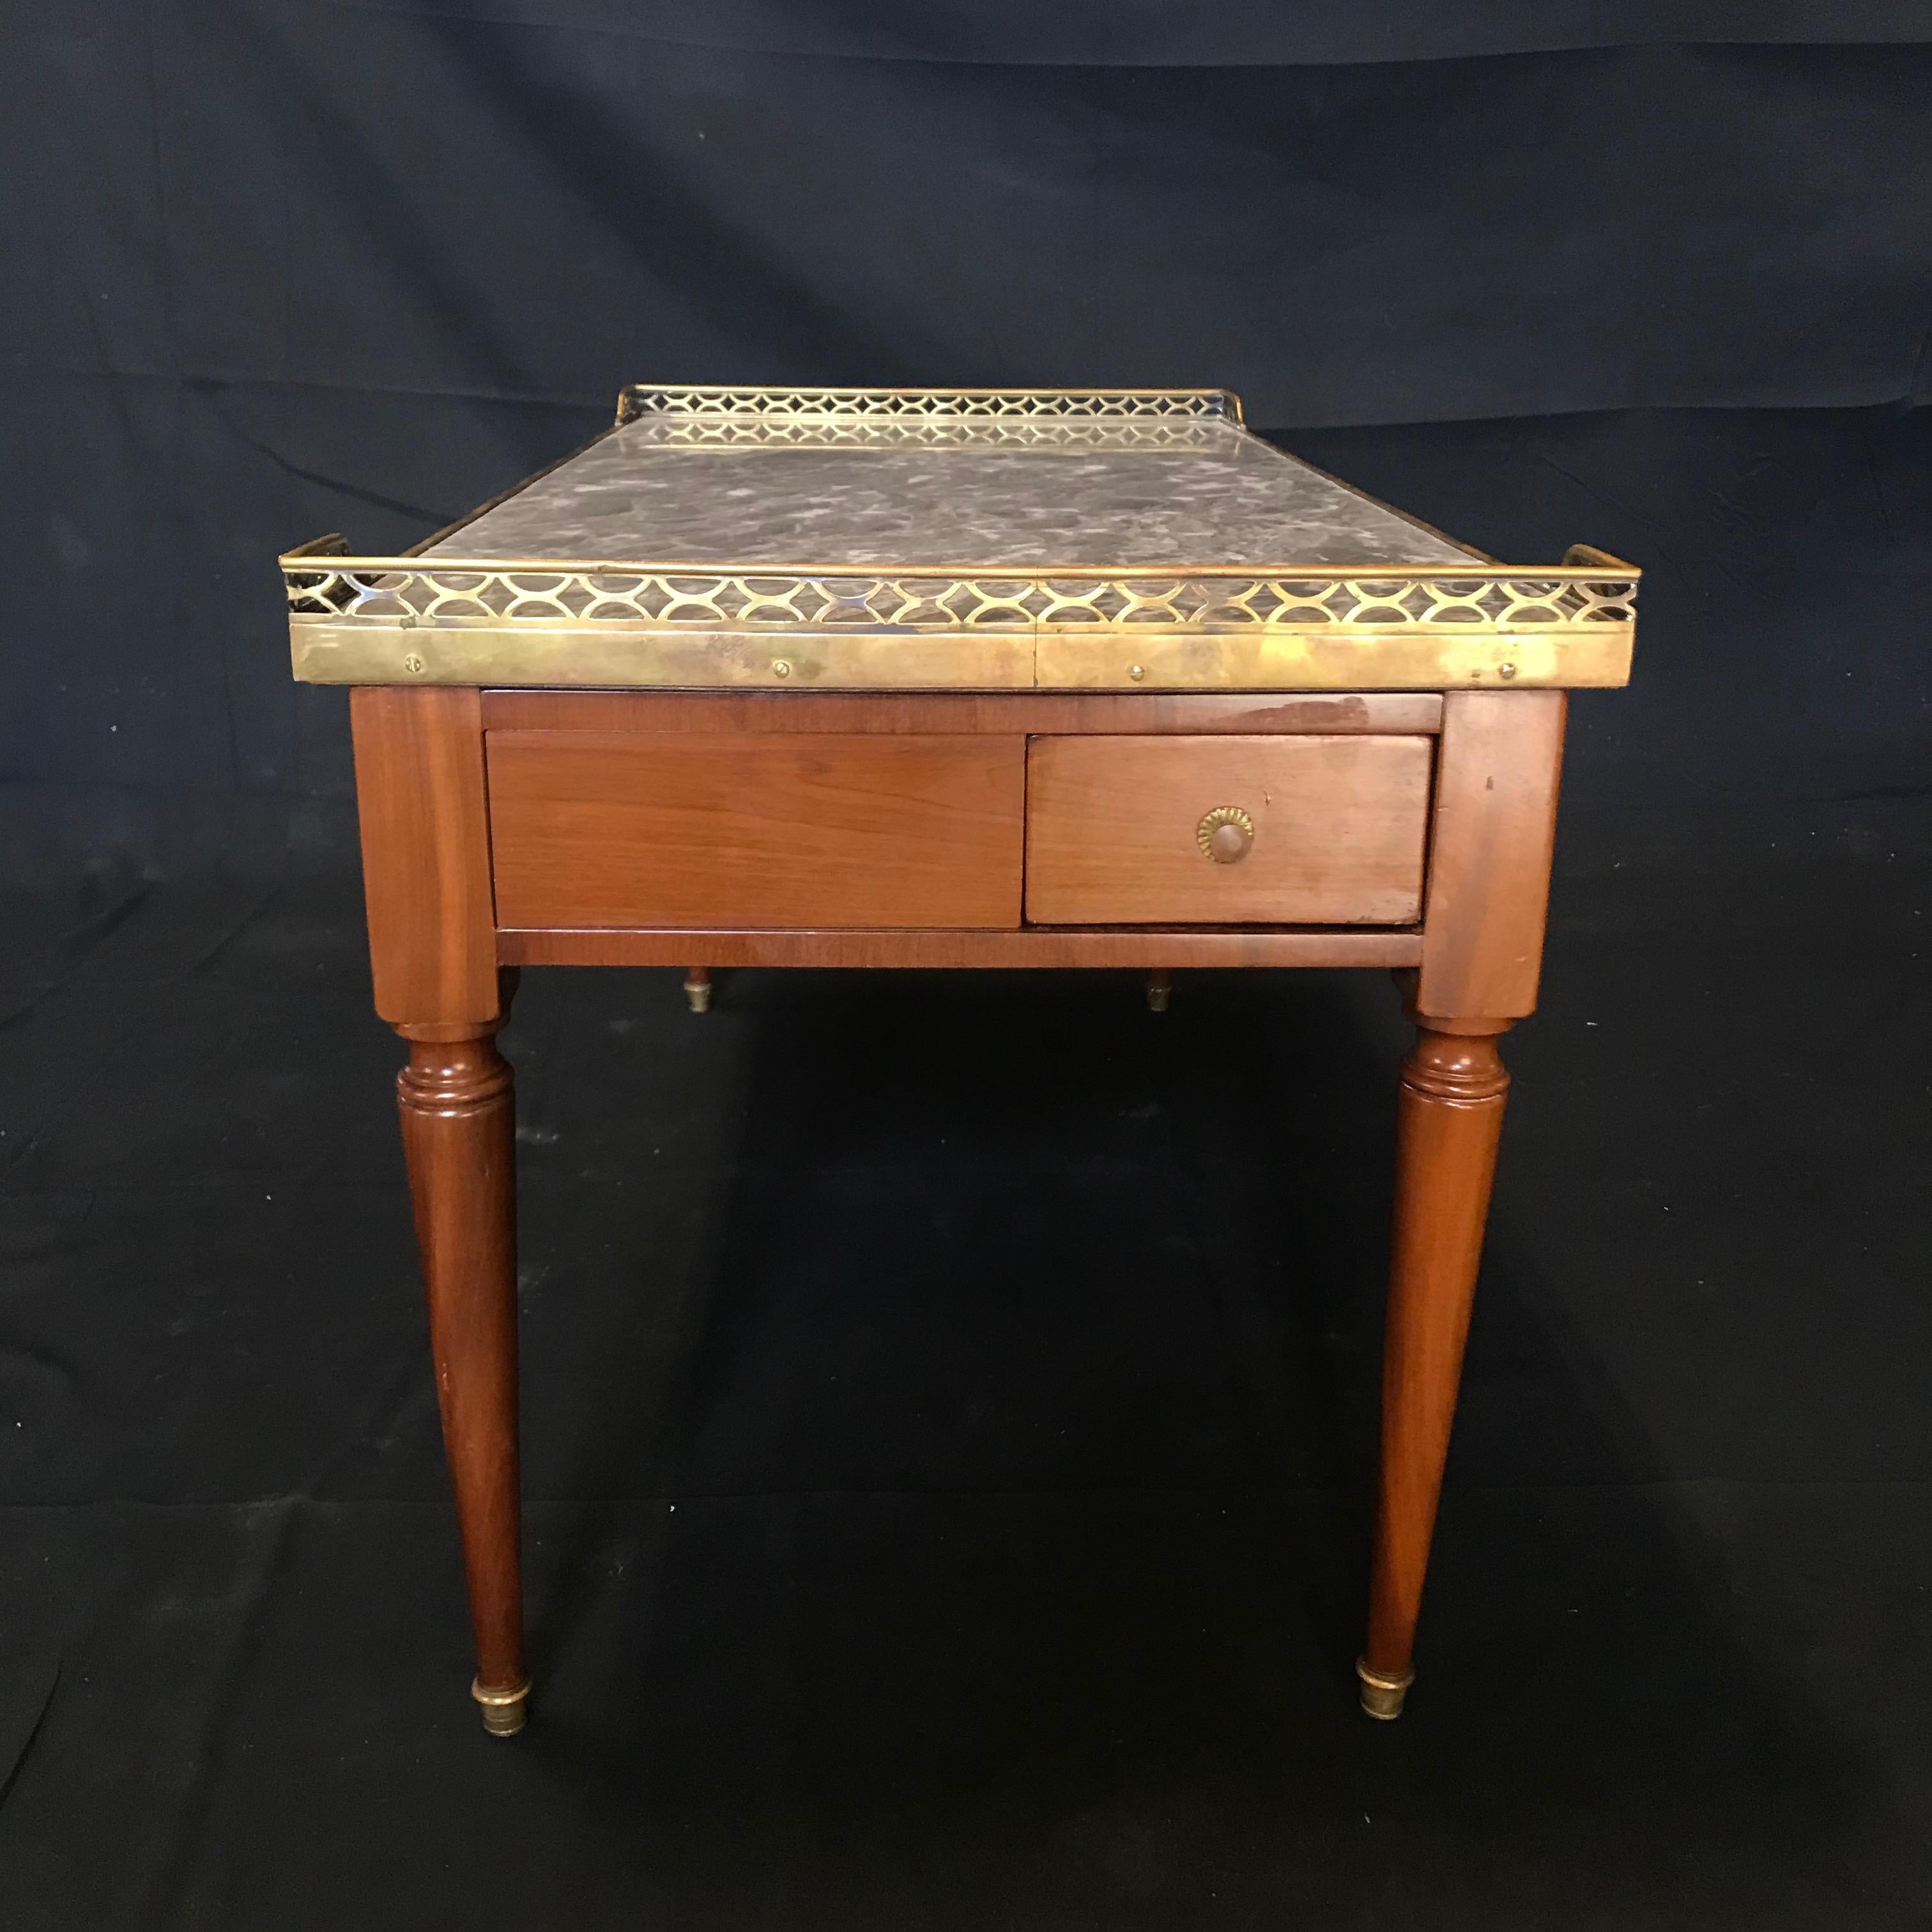 Elegant classic French Louis XVI style coffee table having gold fretwork around a gorgeous gray Italian marble top with walnut base and tapered legs. The single drawer at one end is a surprising beautiful touch.
#5823
H skirt 13”.
 